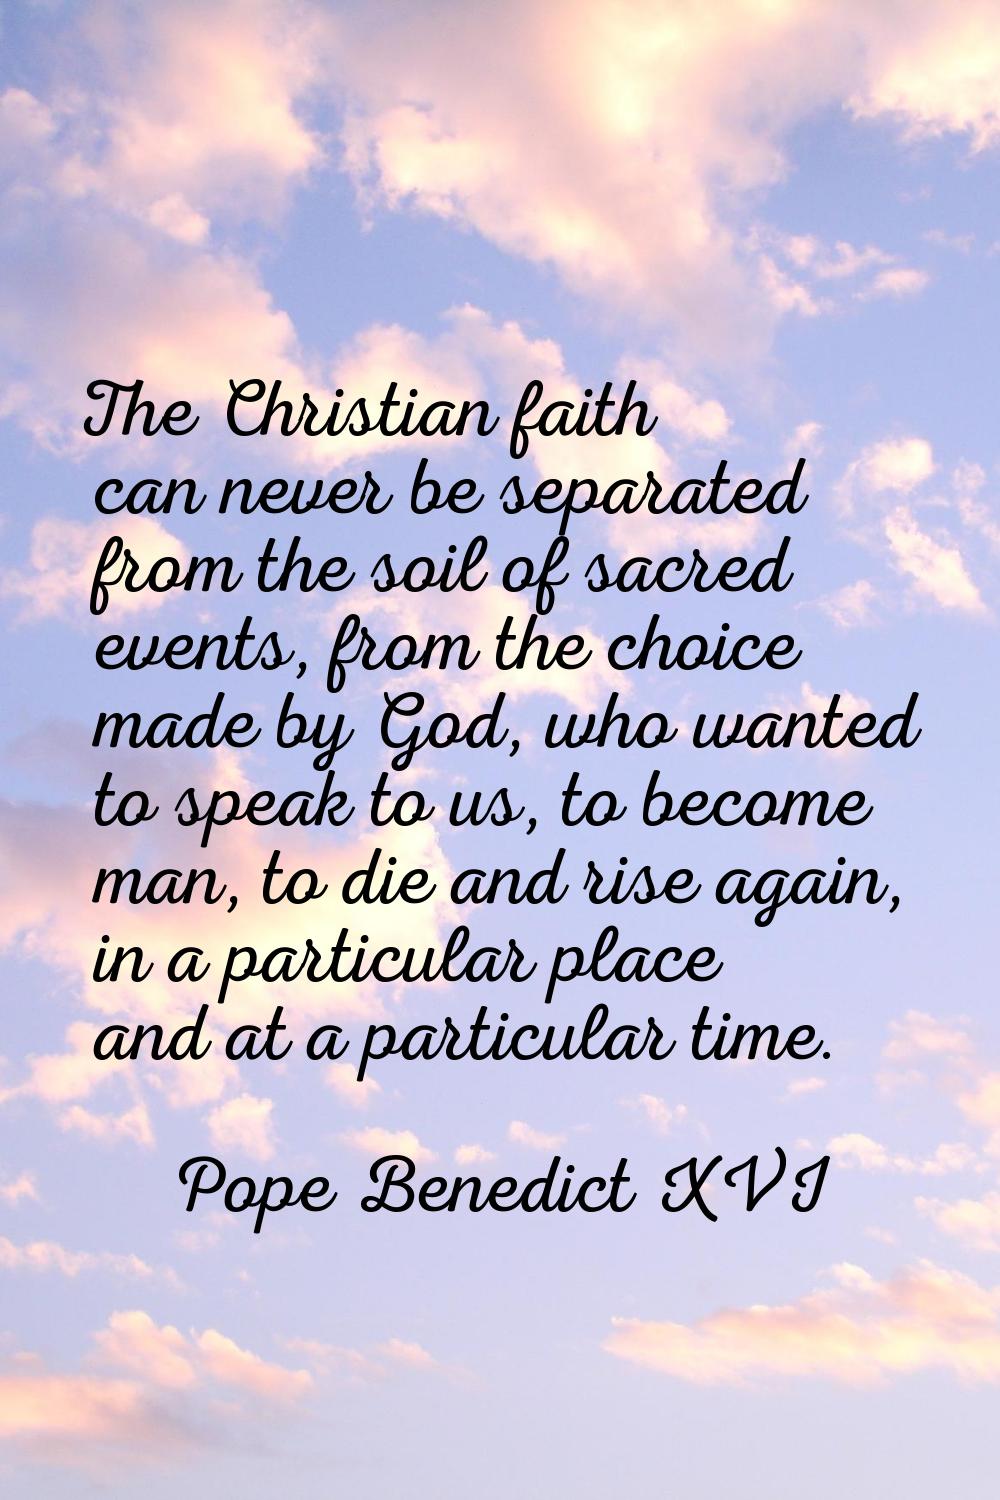 The Christian faith can never be separated from the soil of sacred events, from the choice made by 